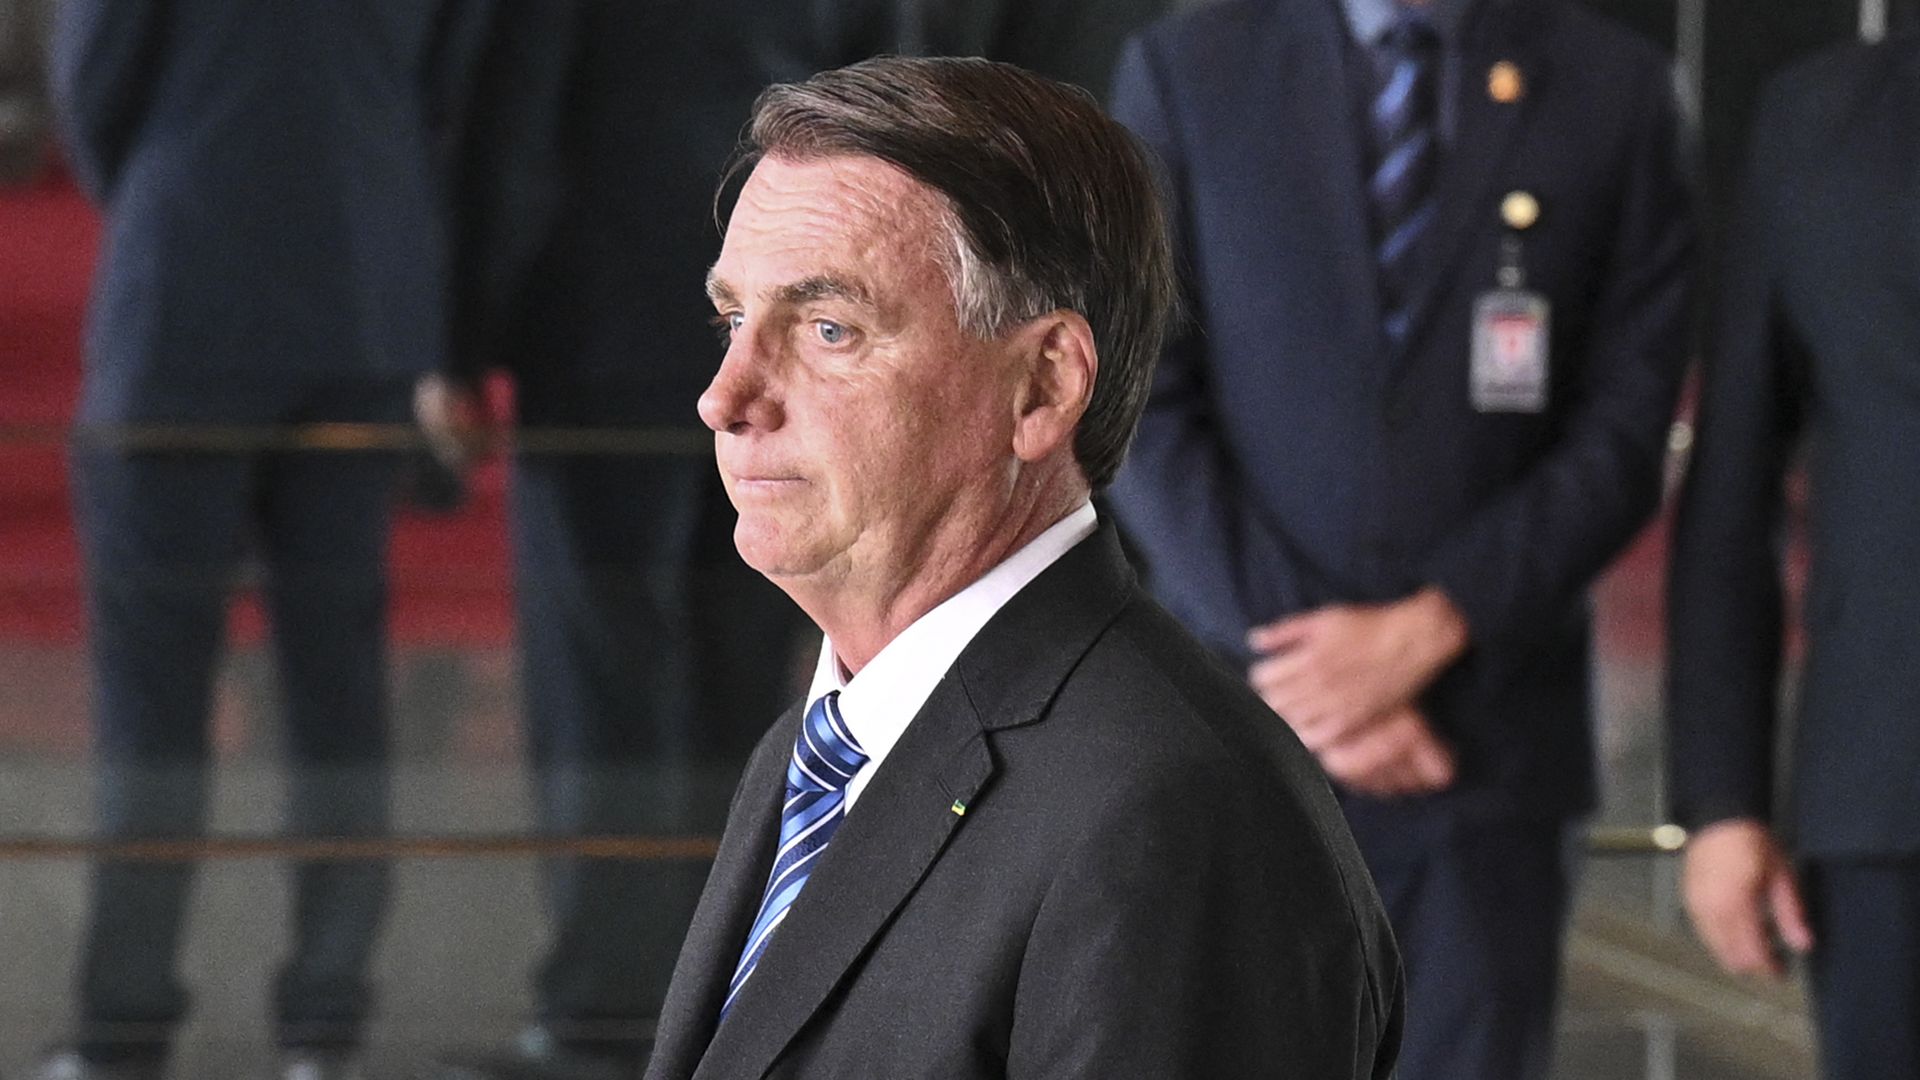 Brazilian President Jair Bolsonaro appears to make a statement for the first time since Sunday's presidential run-off election, at Alvorada Palace in Brasilia, on November 1.